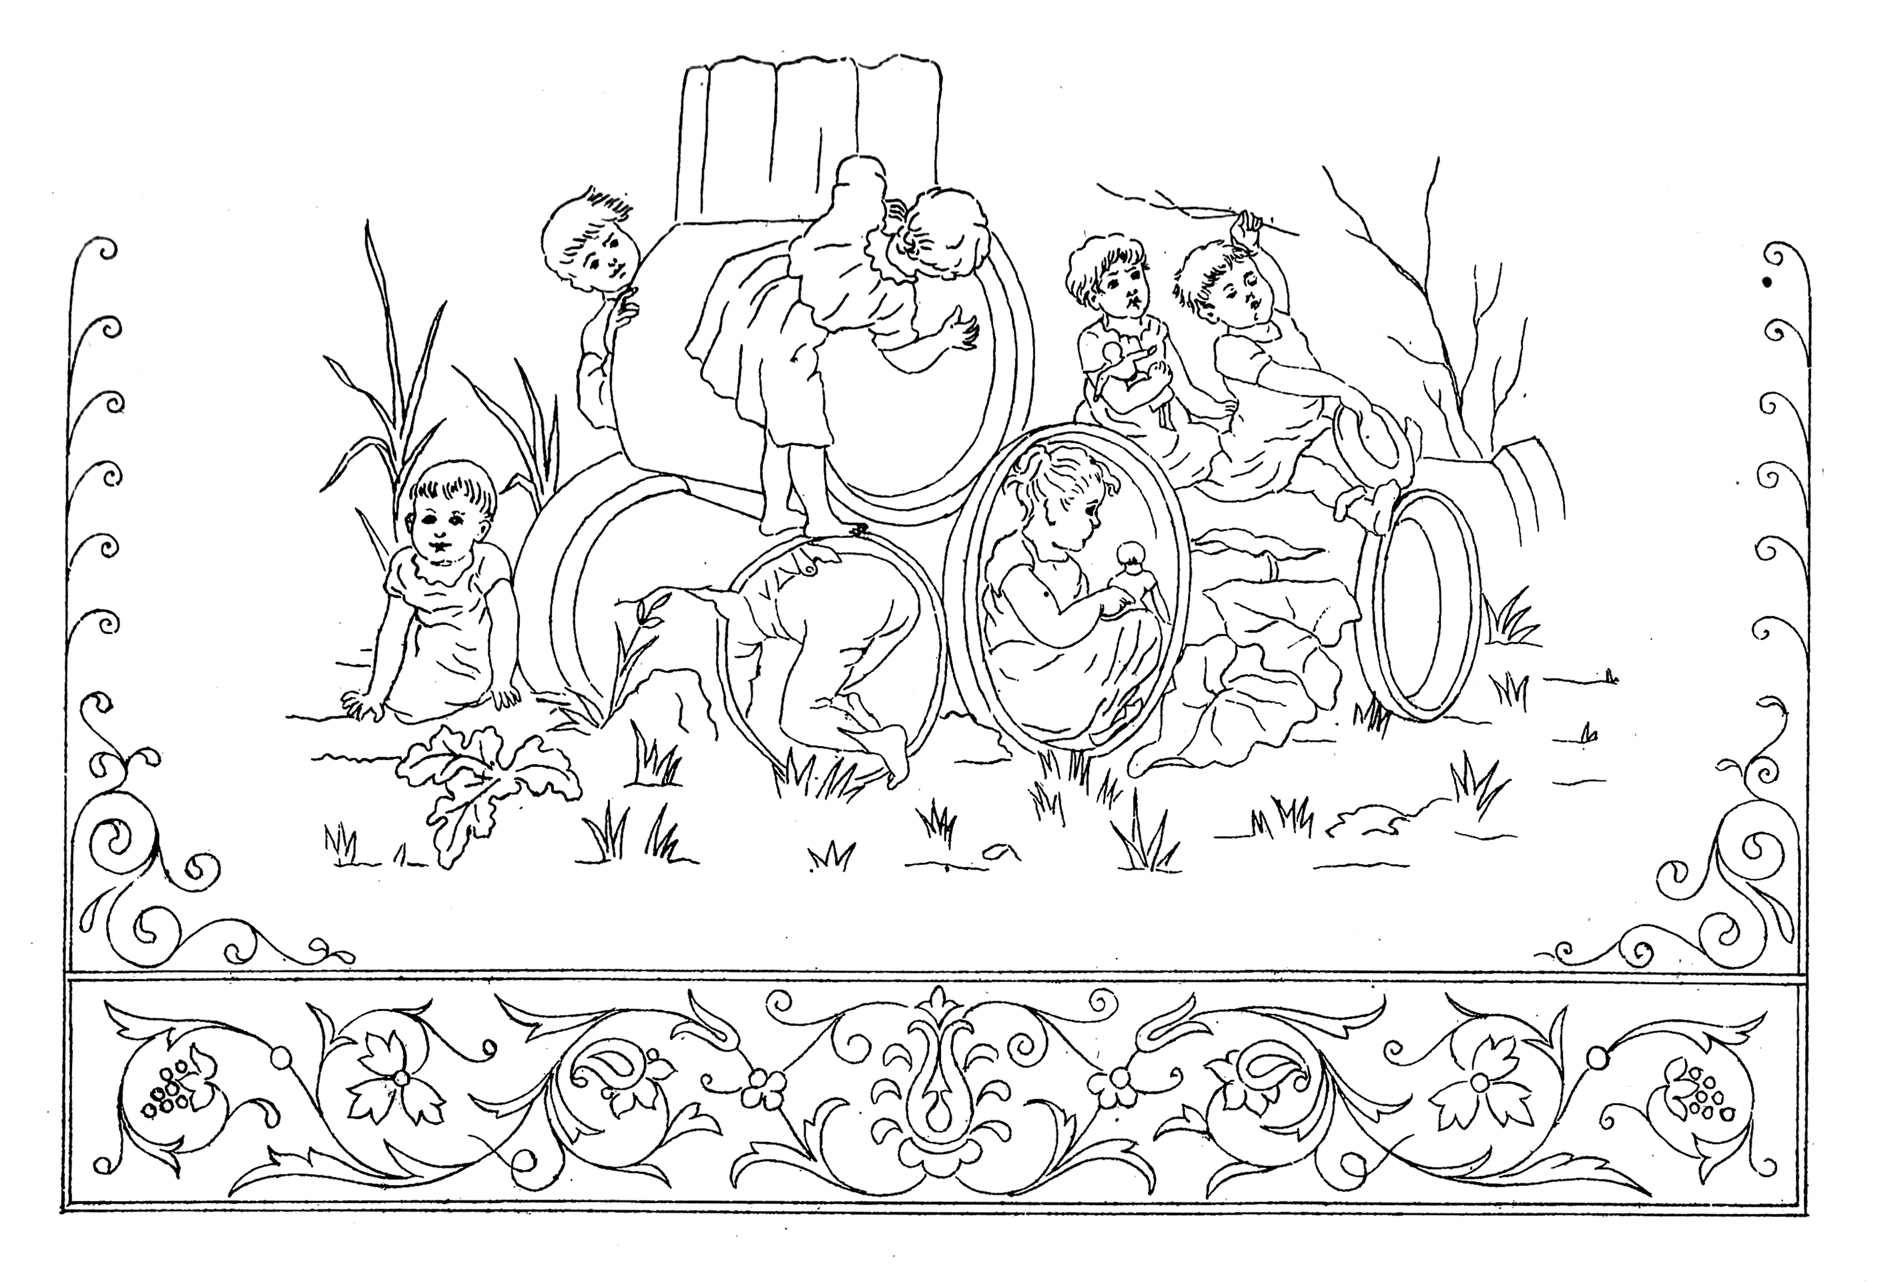 old coloring page with Victorian children playing outdoor